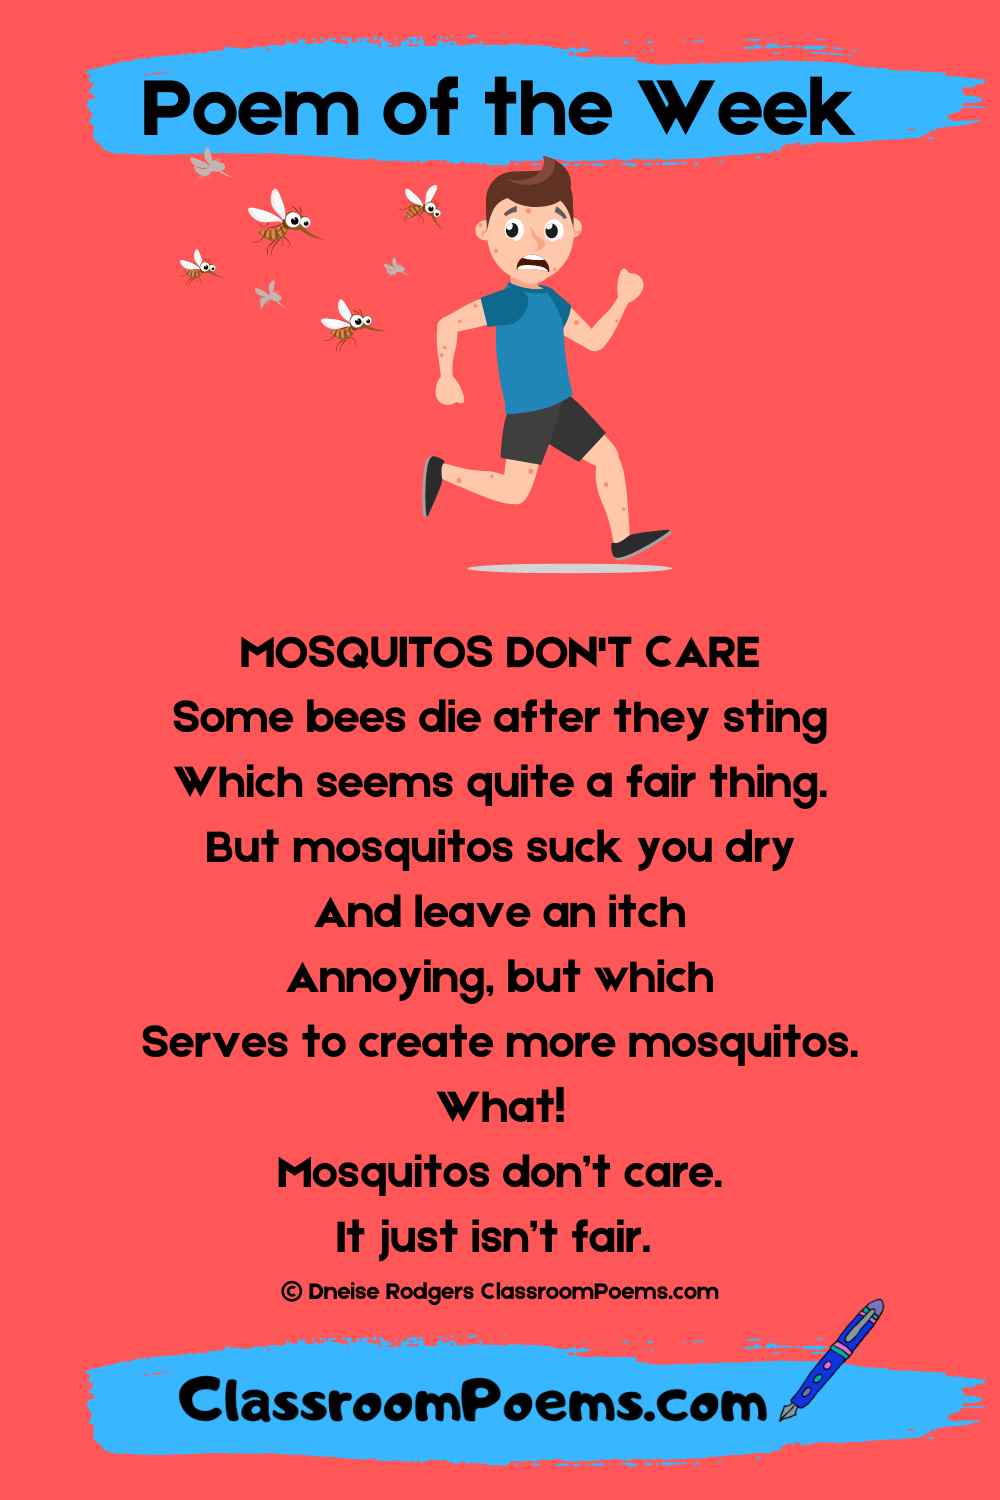 Mosquito poem by Denise Rodgers on ClassroomPoems.com.